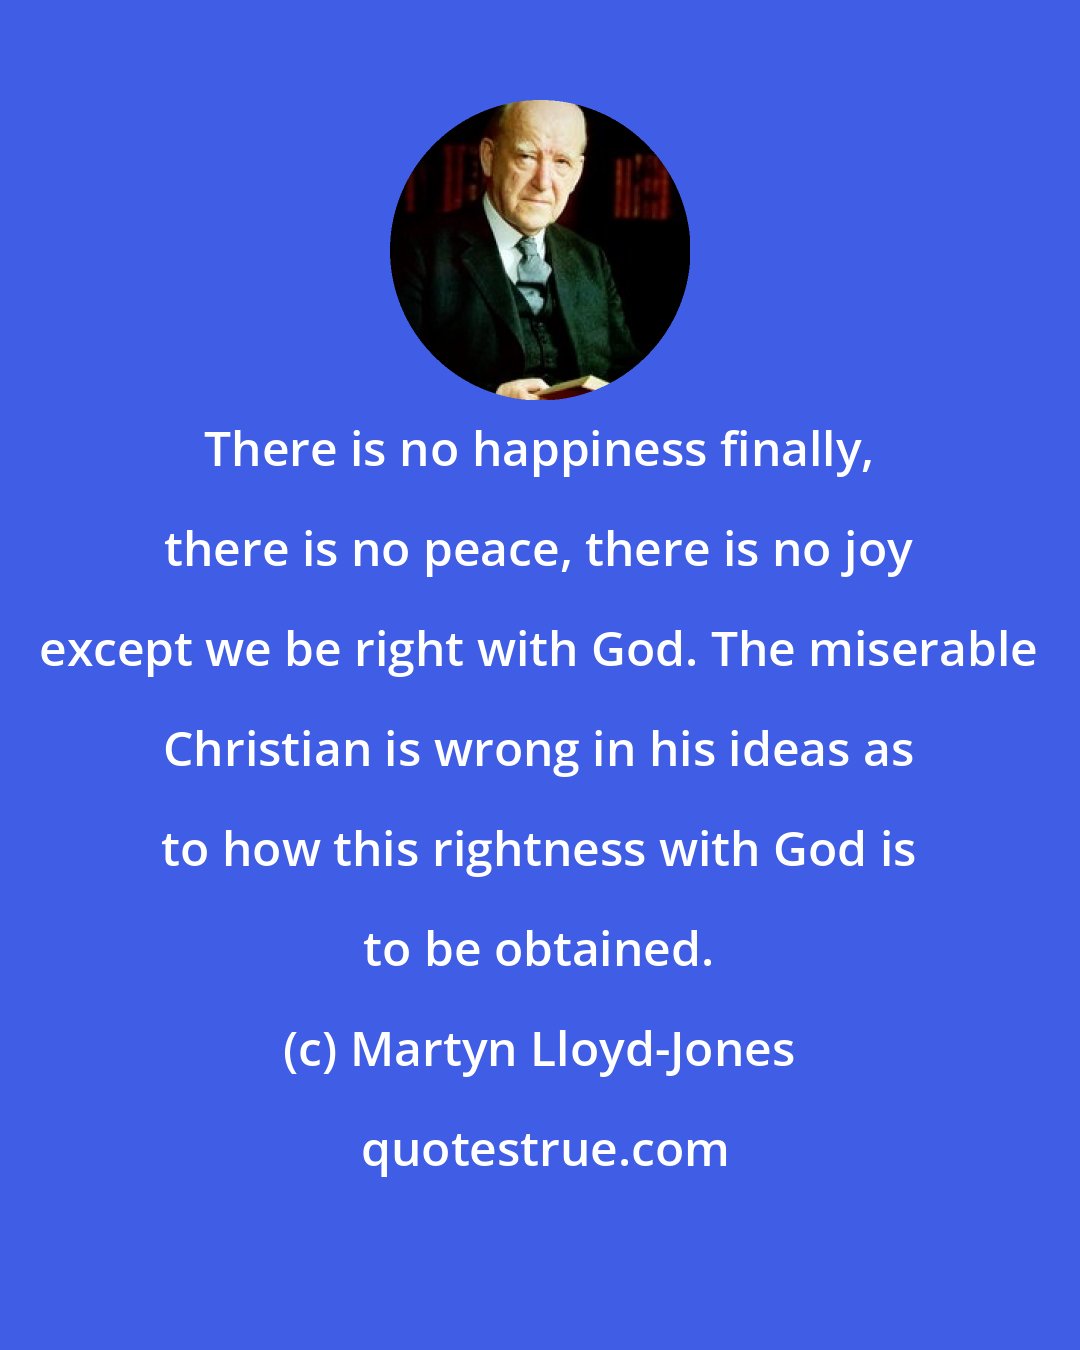 Martyn Lloyd-Jones: There is no happiness finally, there is no peace, there is no joy except we be right with God. The miserable Christian is wrong in his ideas as to how this rightness with God is to be obtained.